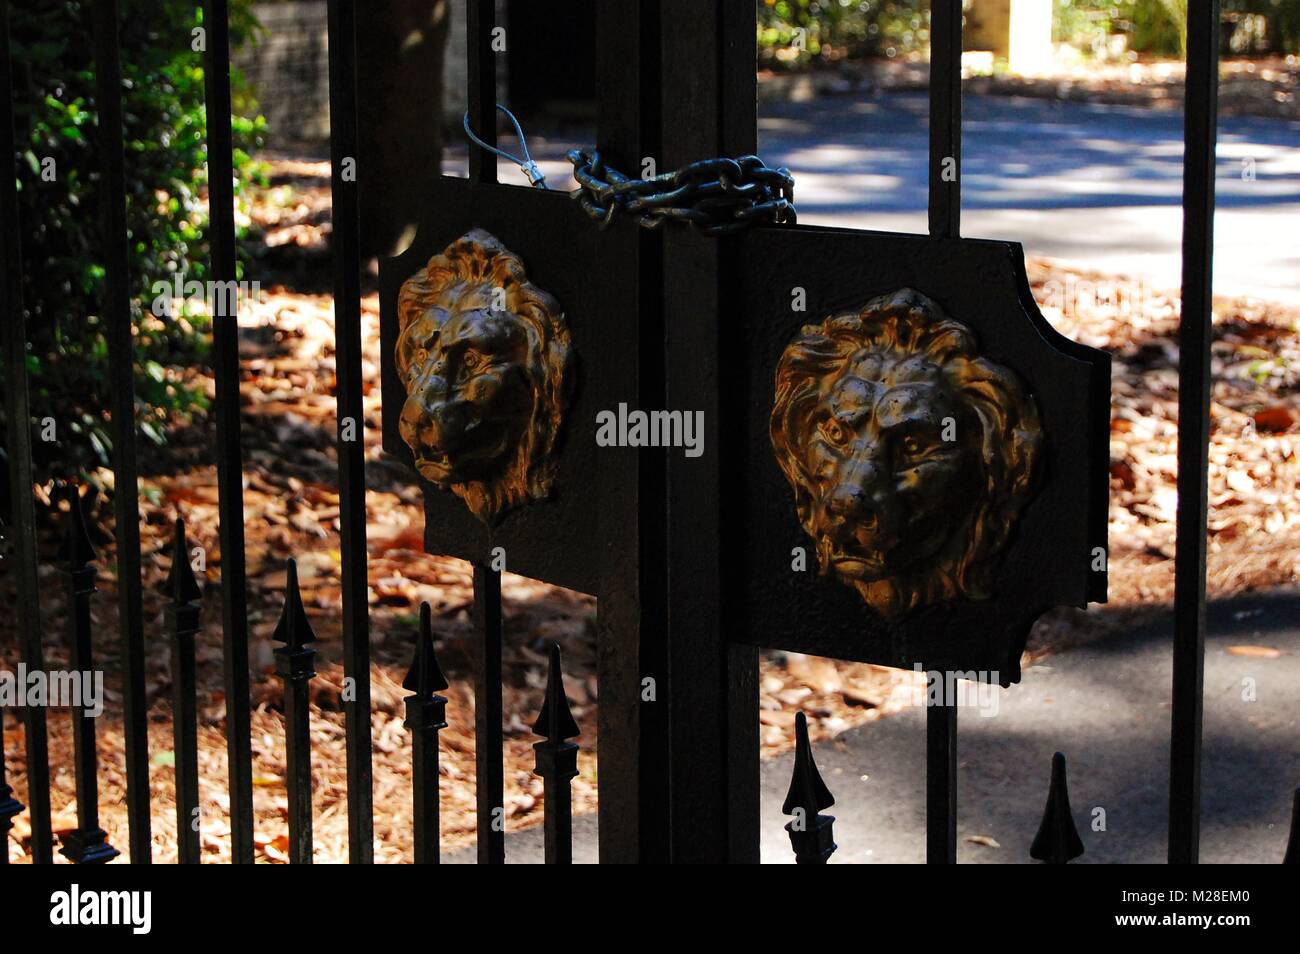 Lions gate at the Vines Mansion. Stock Photo